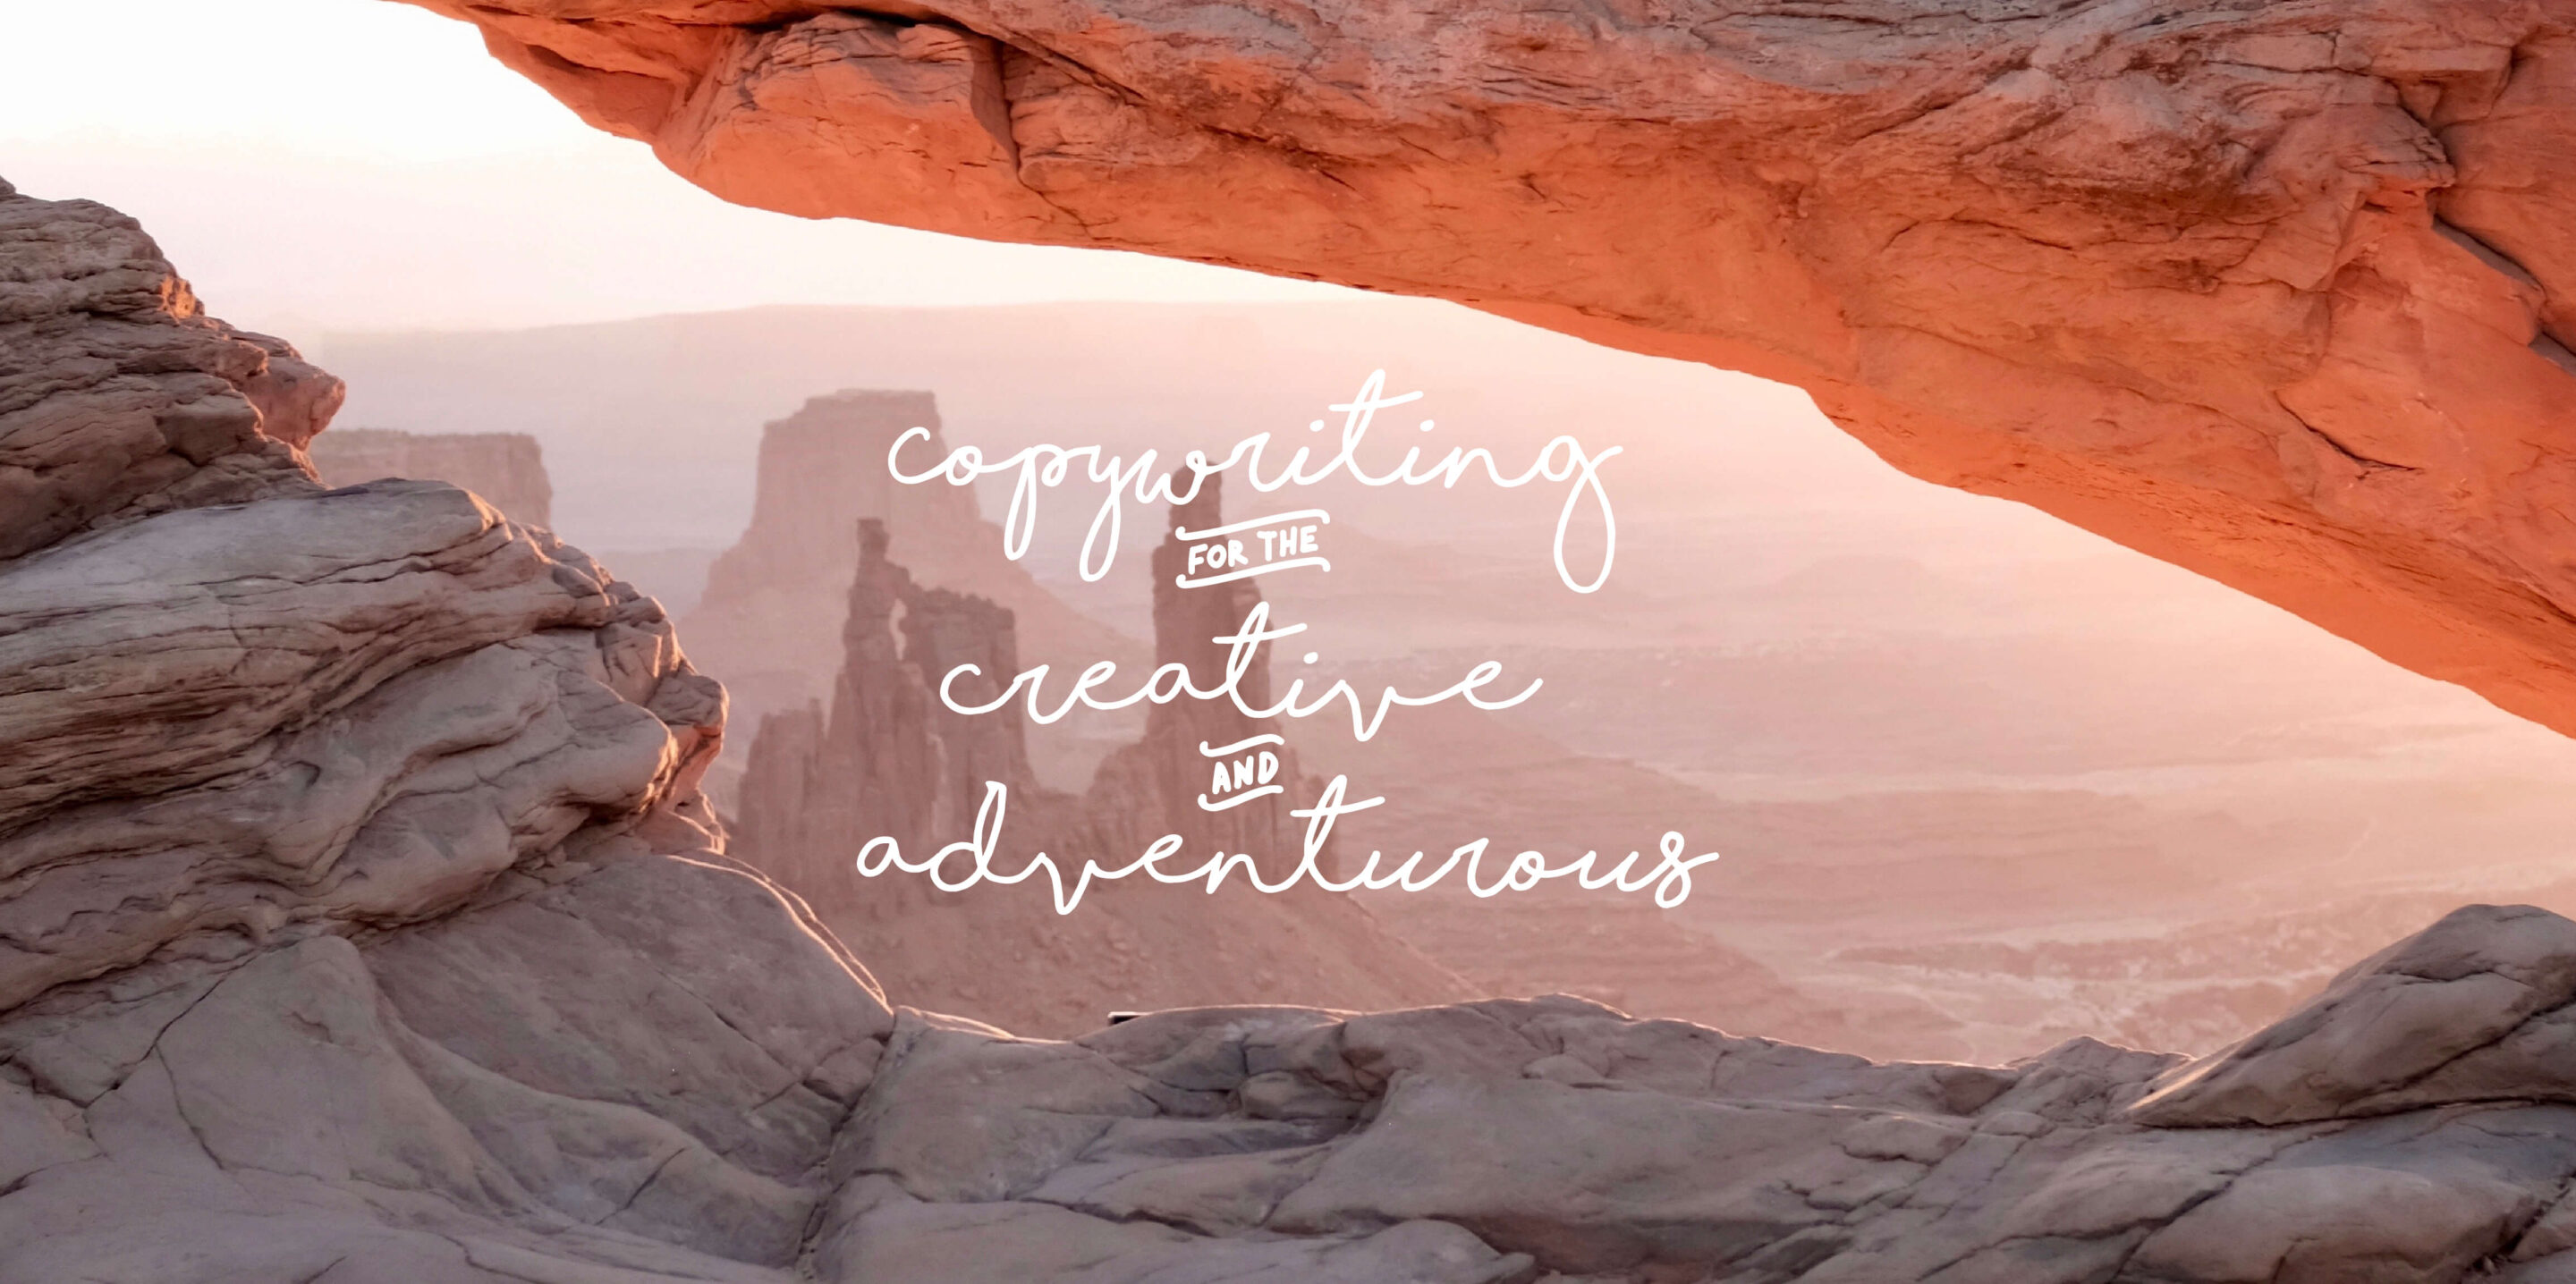 Cursive script reading copywriting for the creative and adventurous overlaid on a photograph of desert rock